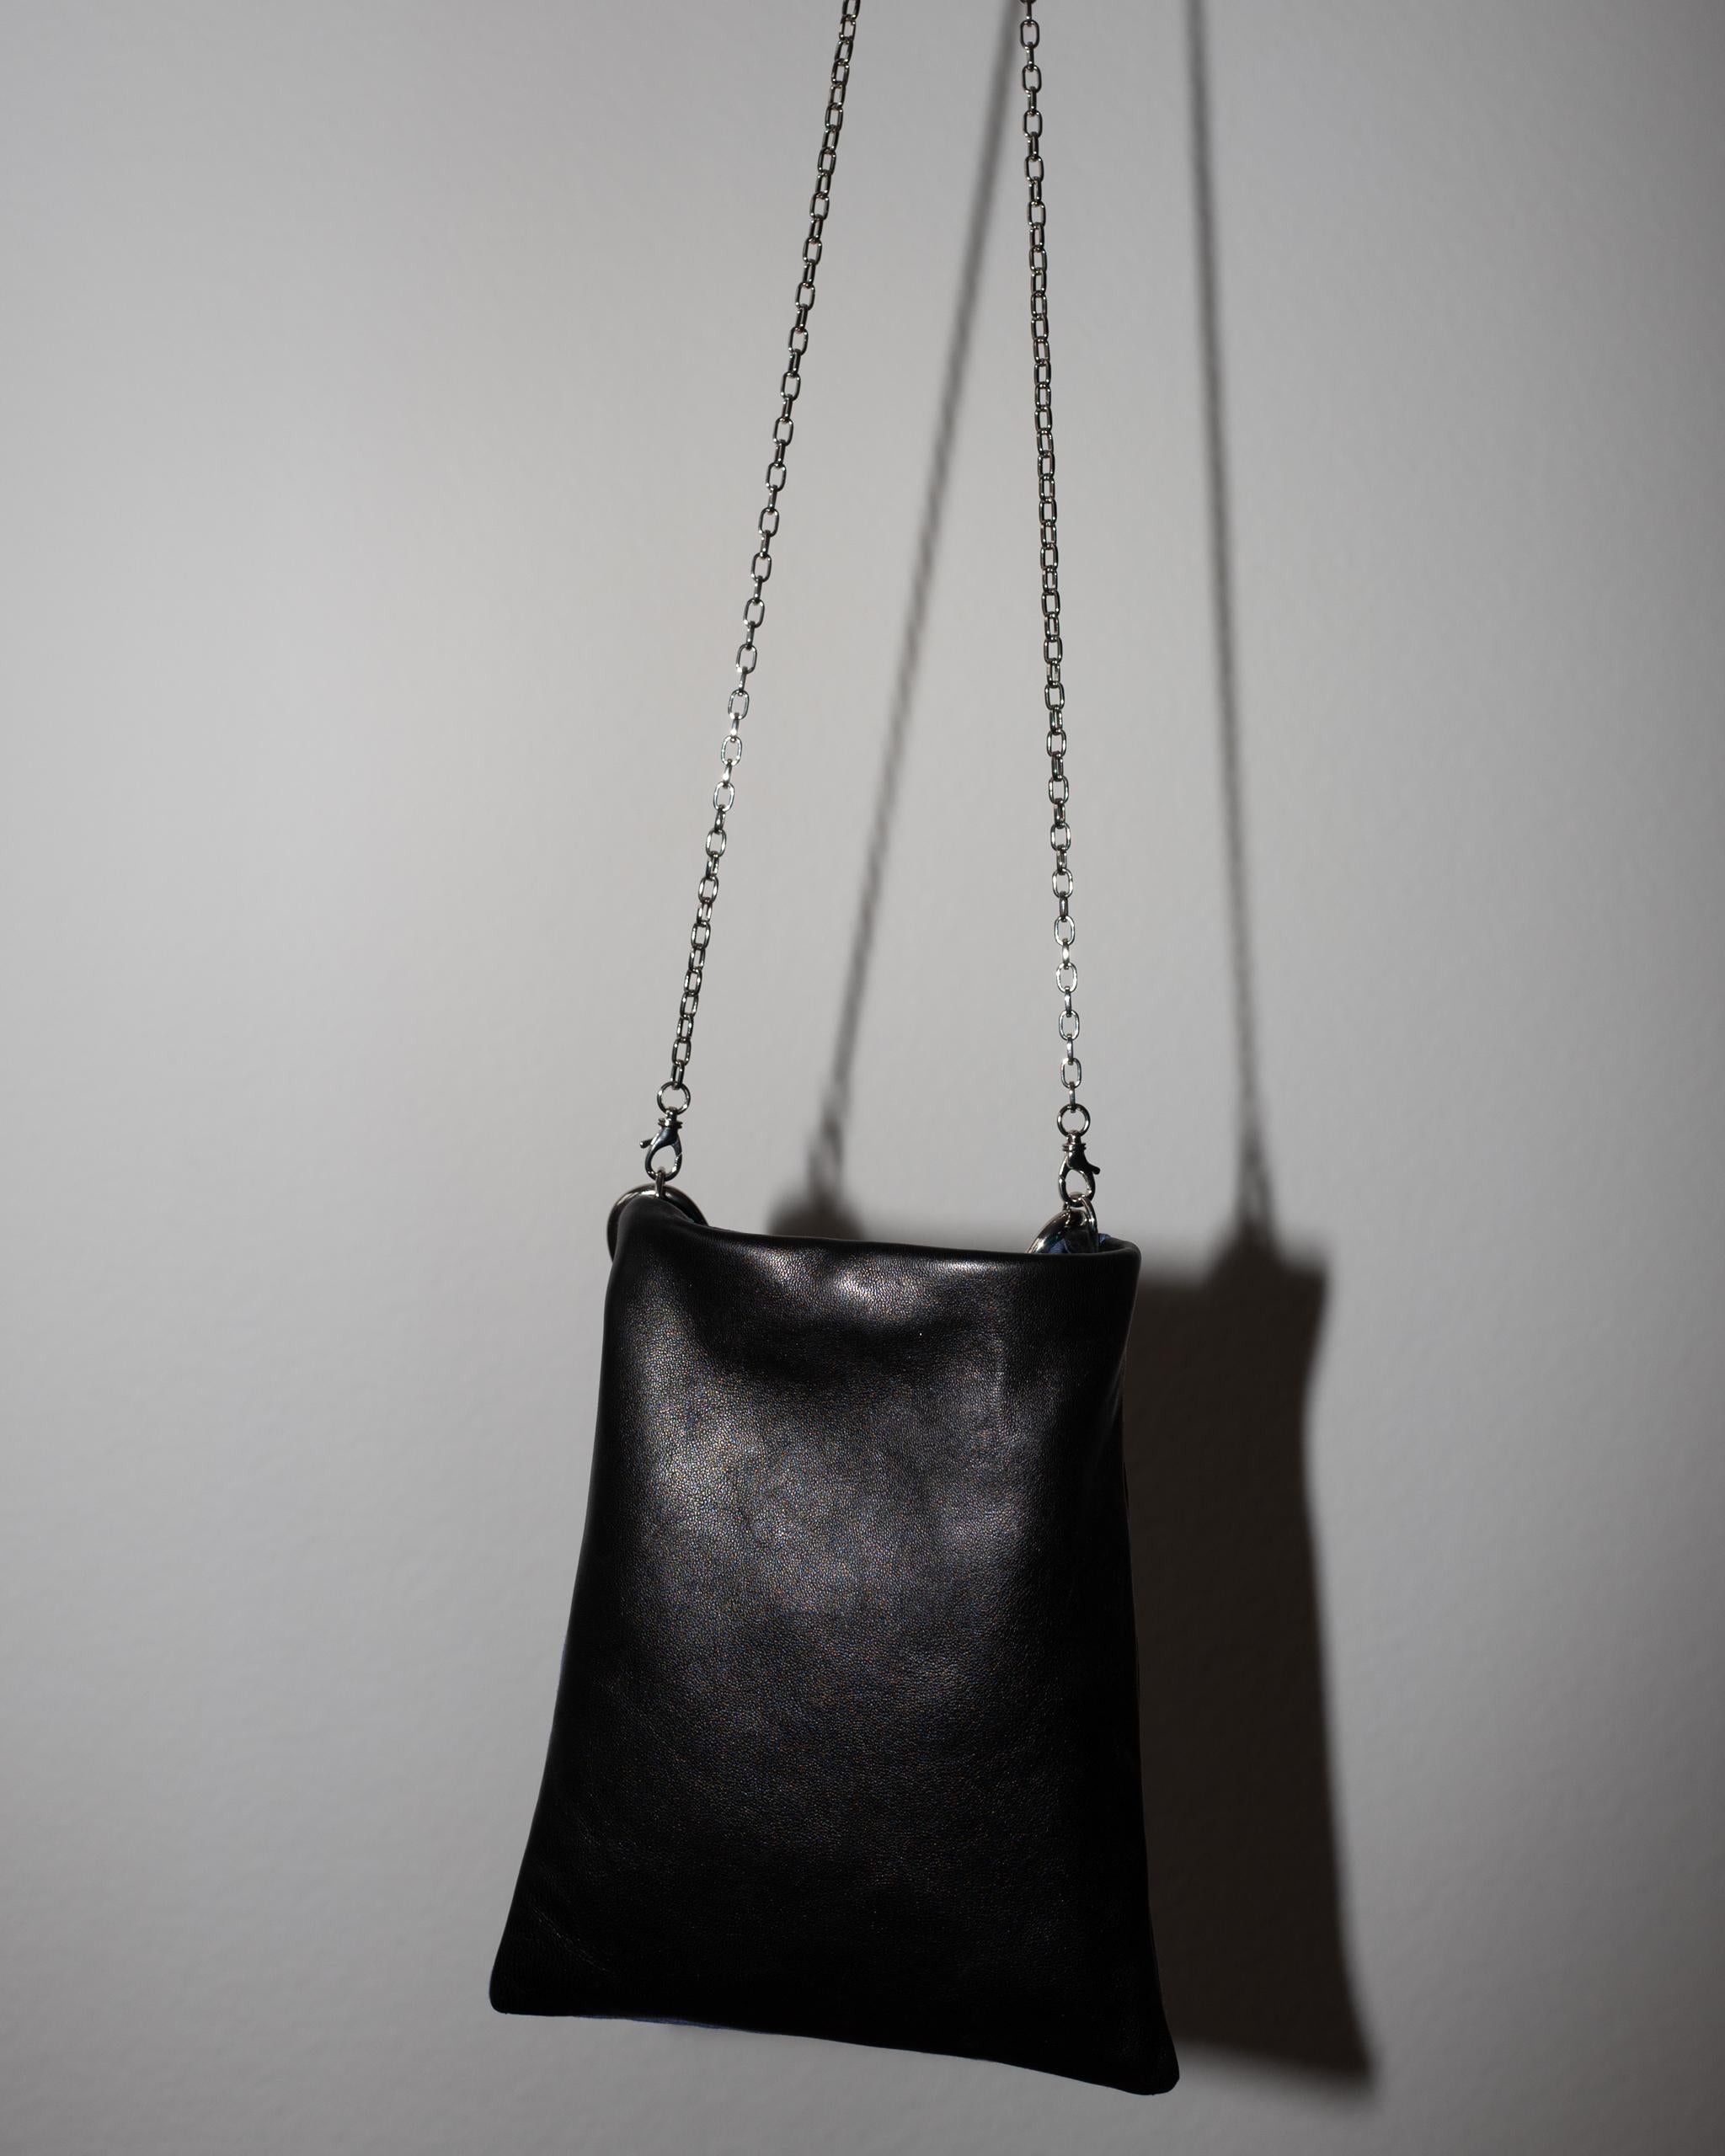 Crystal Embellished Blue Evening Shoulder Bag Black Leather Chunky Chain In New Condition For Sale In Los Angeles, CA